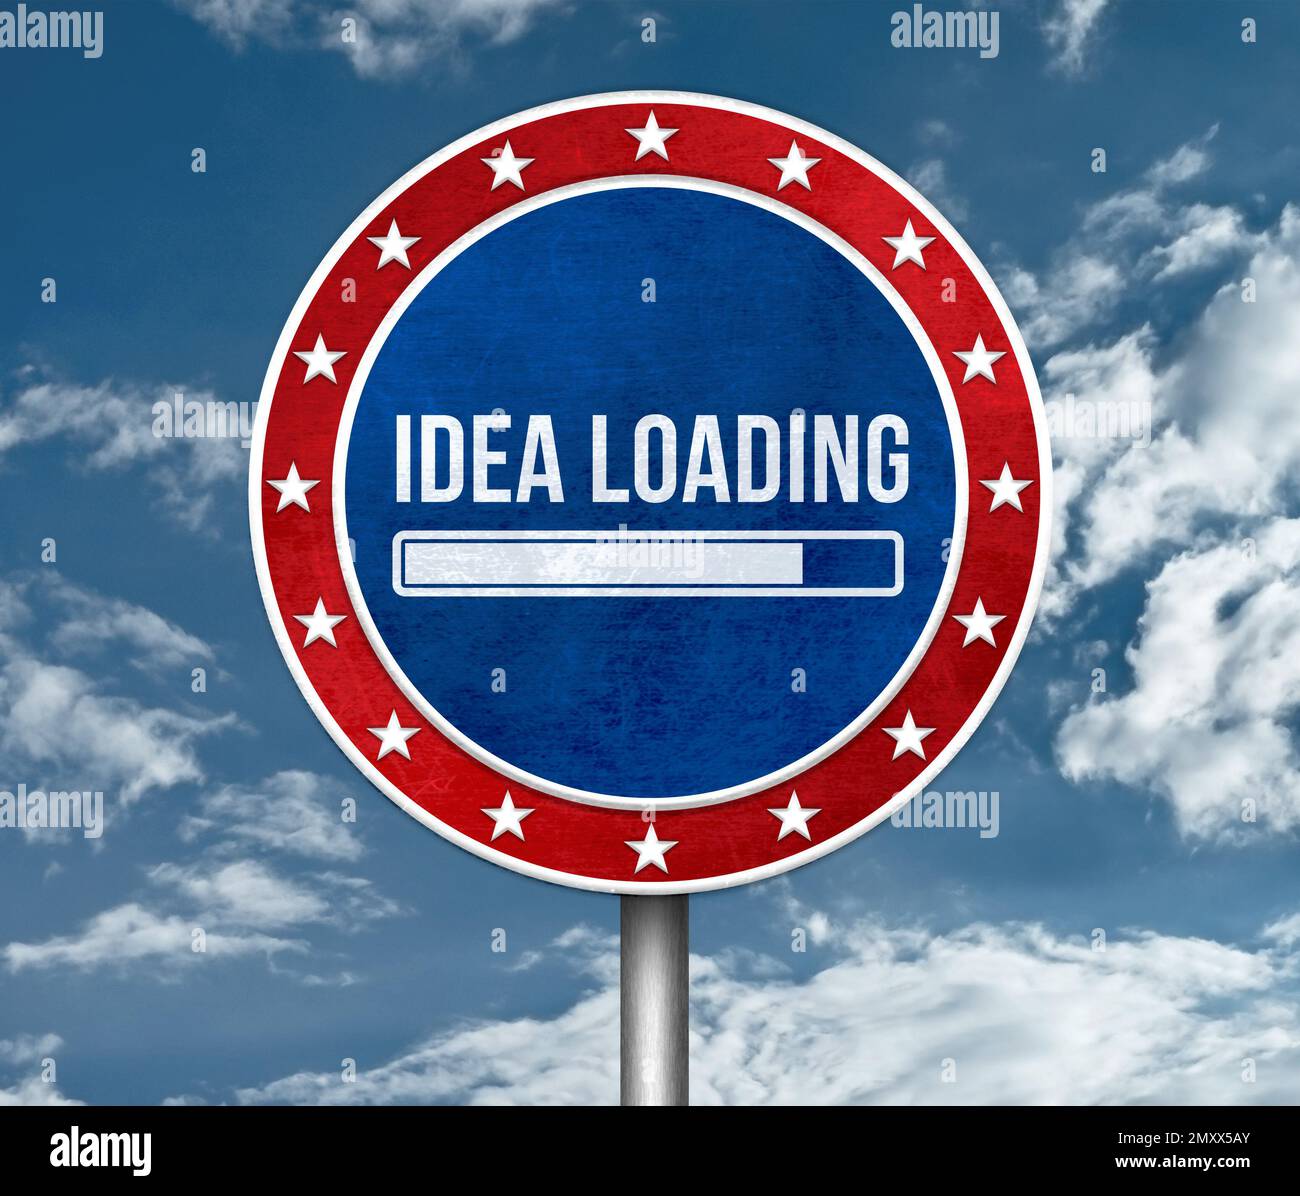 Idea loading - road sign message with loading process Stock Photo